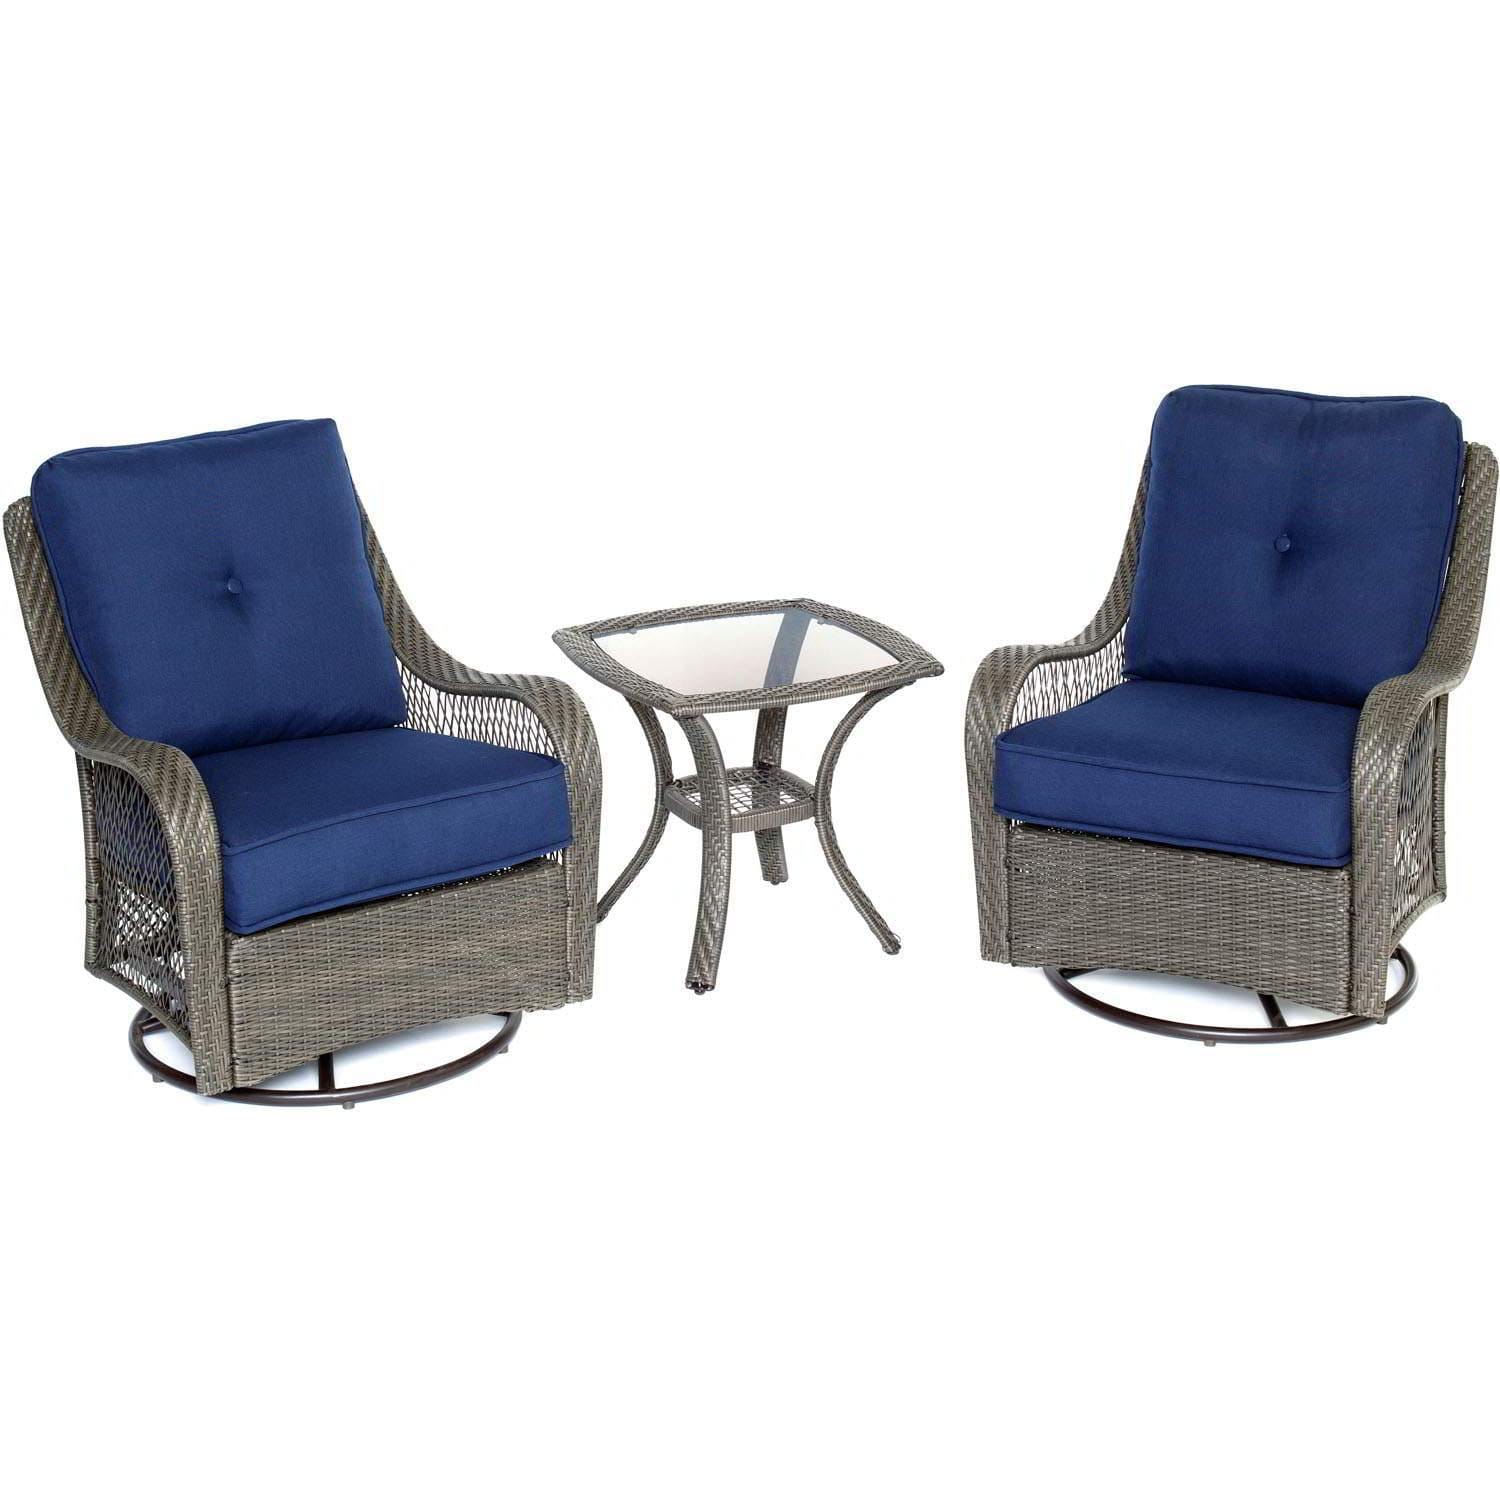 Hanover Conversation Set Hanover Orleans 3-Piece Swivel Gliding Chat Set in Navy Blue with Gray Weave